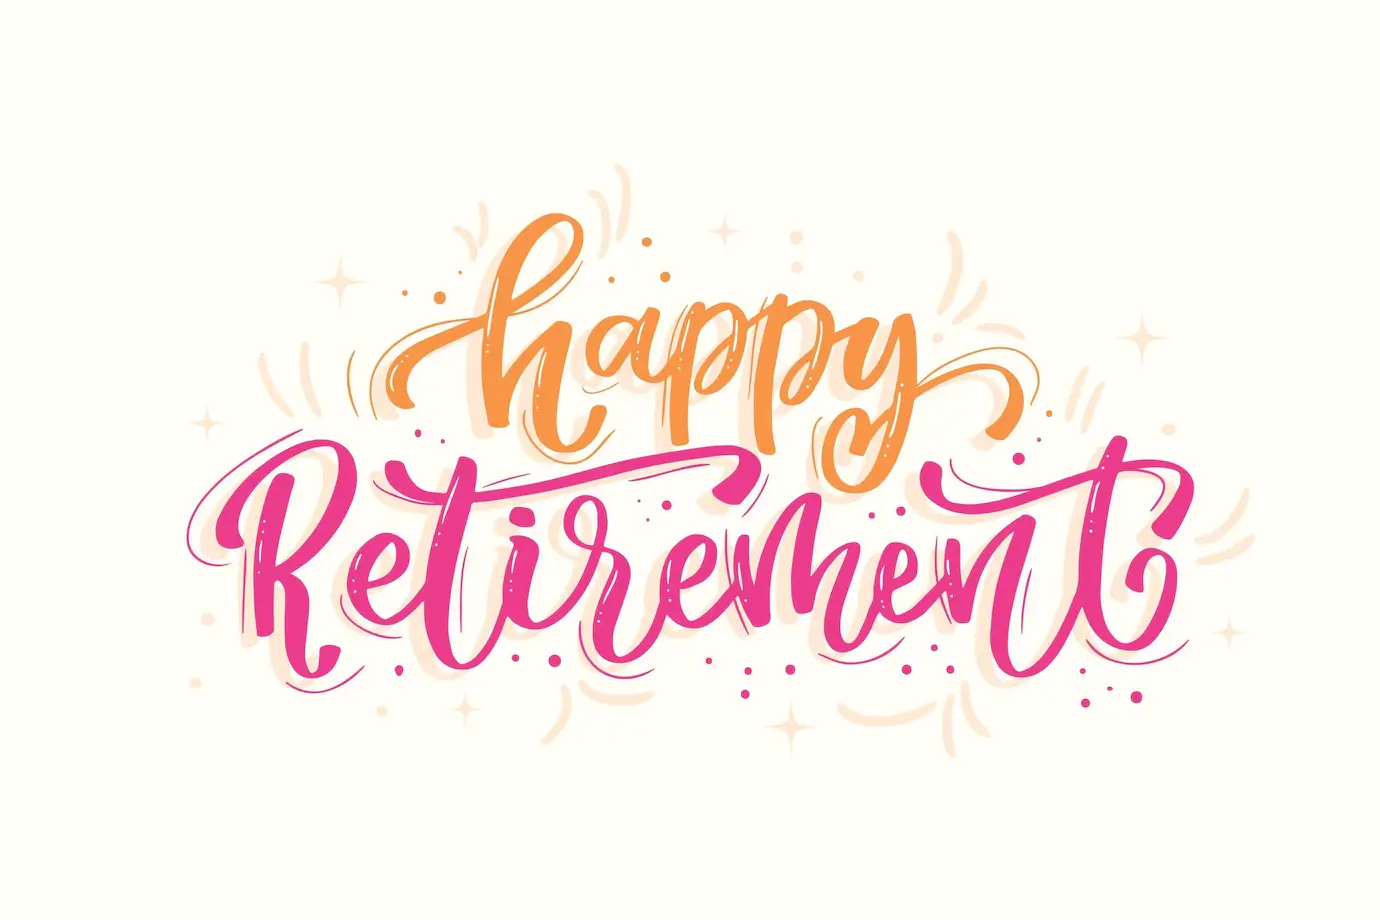 Retirement Wishes for a Friend